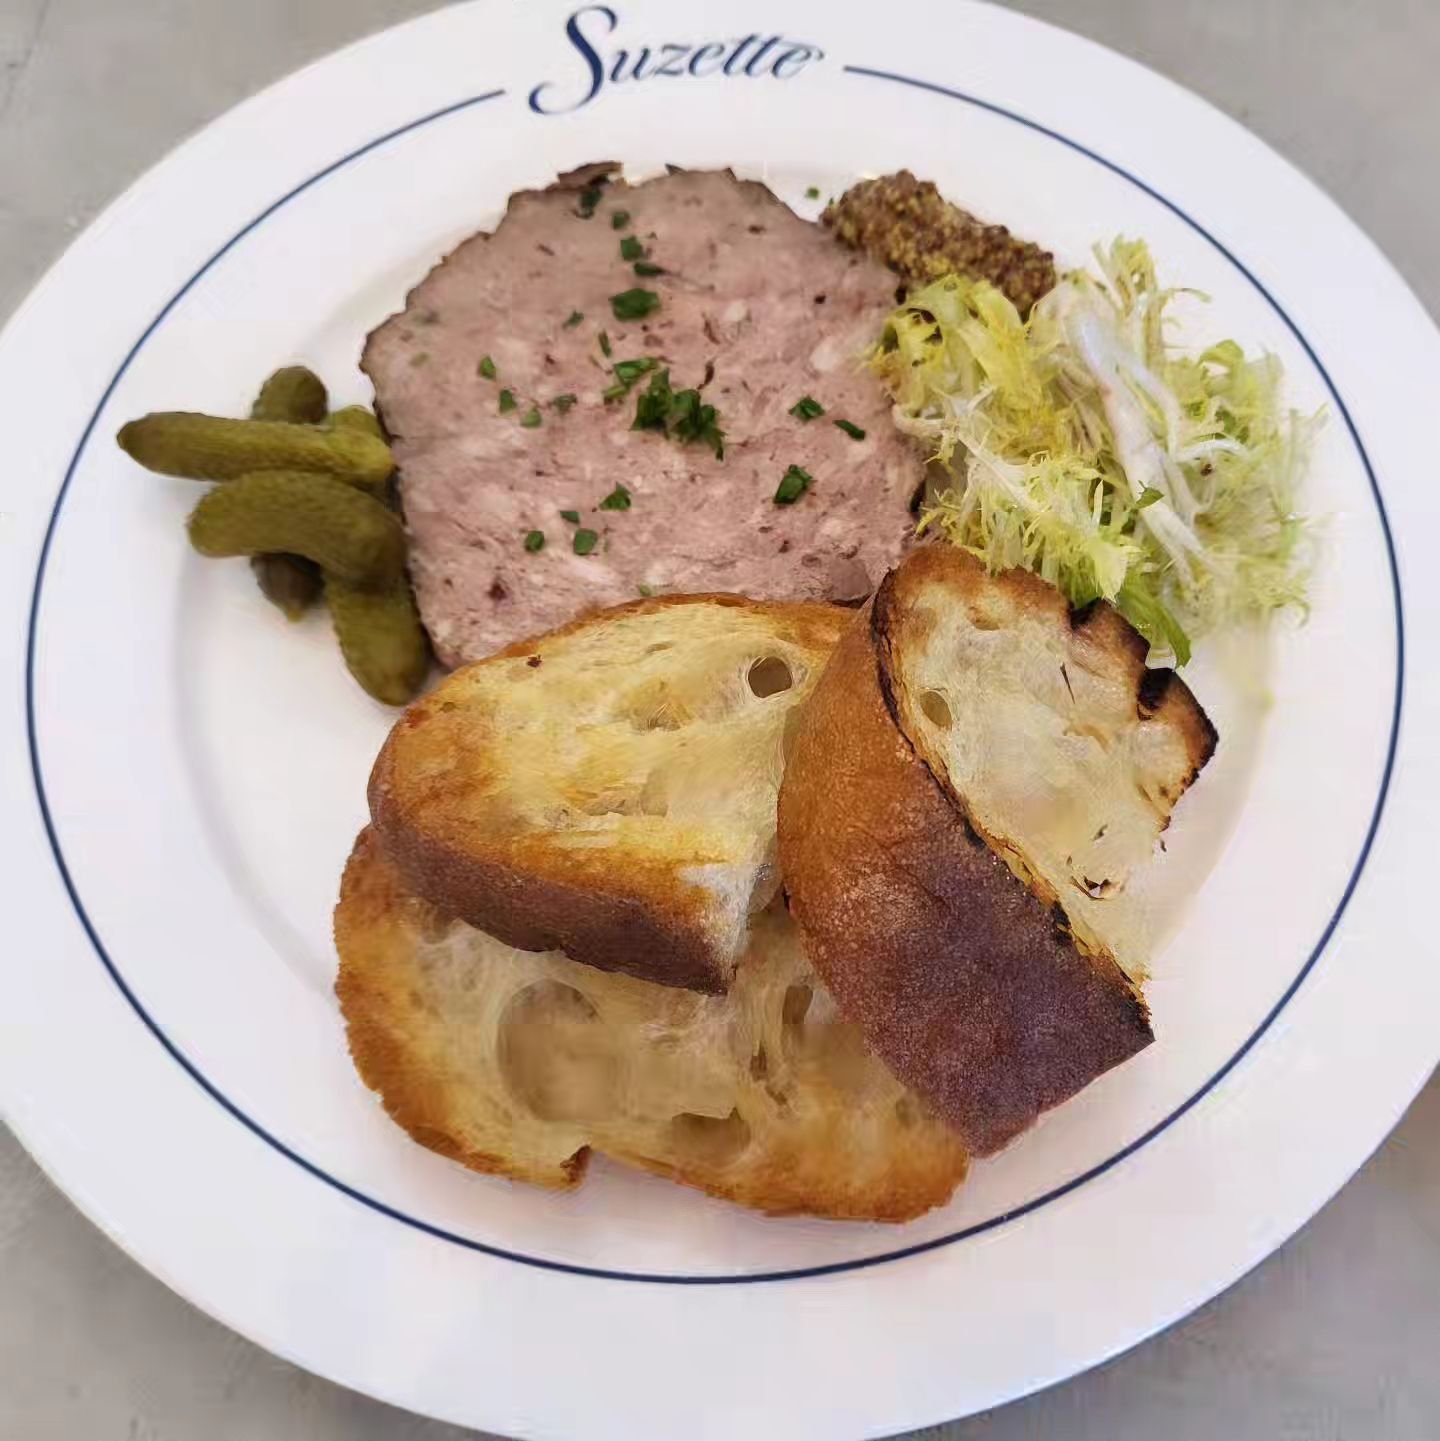 Have you tried our house-made P&acirc;t&eacute; de Campagne yet? 
It has quickly become a favorite at Suzette.